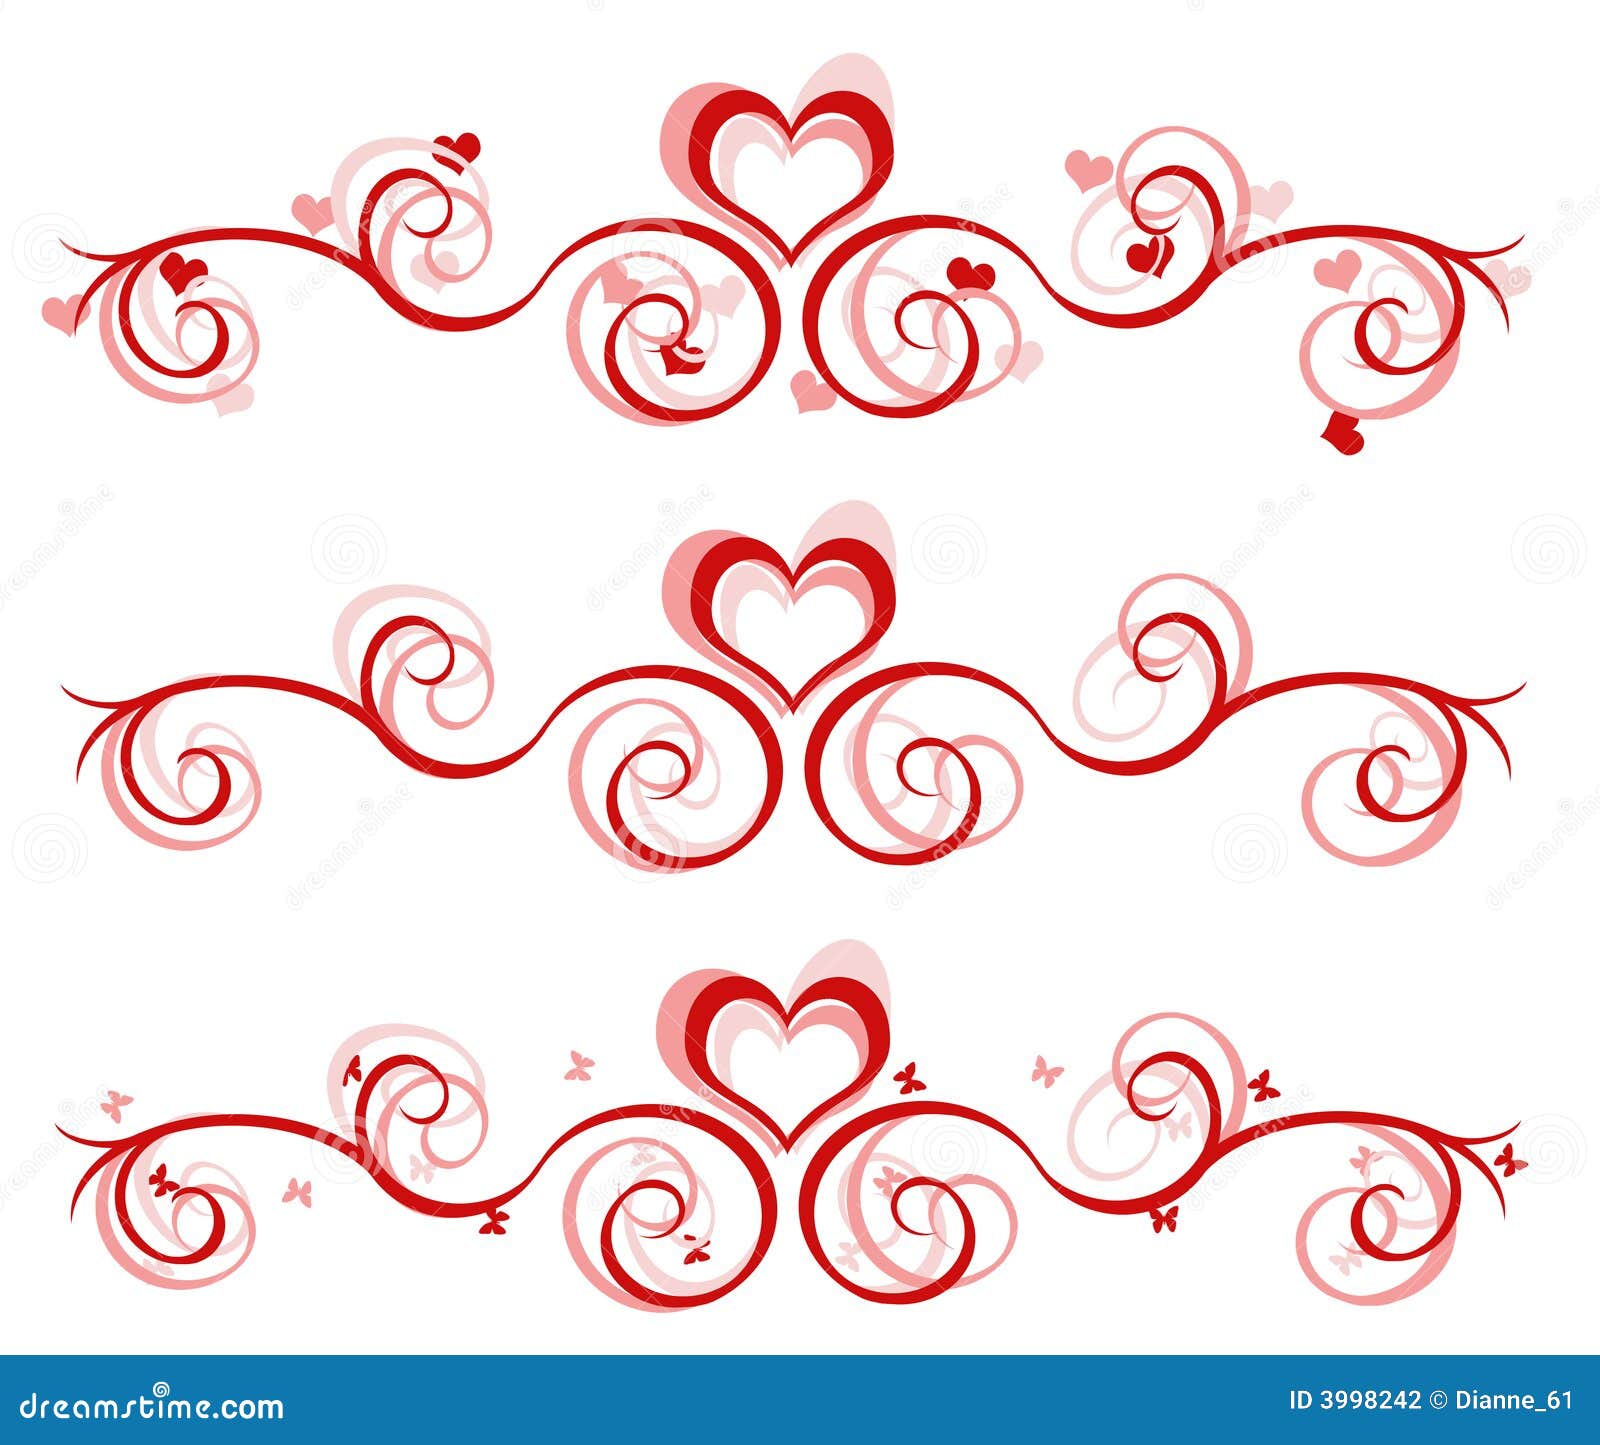 valentine's day banners clipart - photo #37